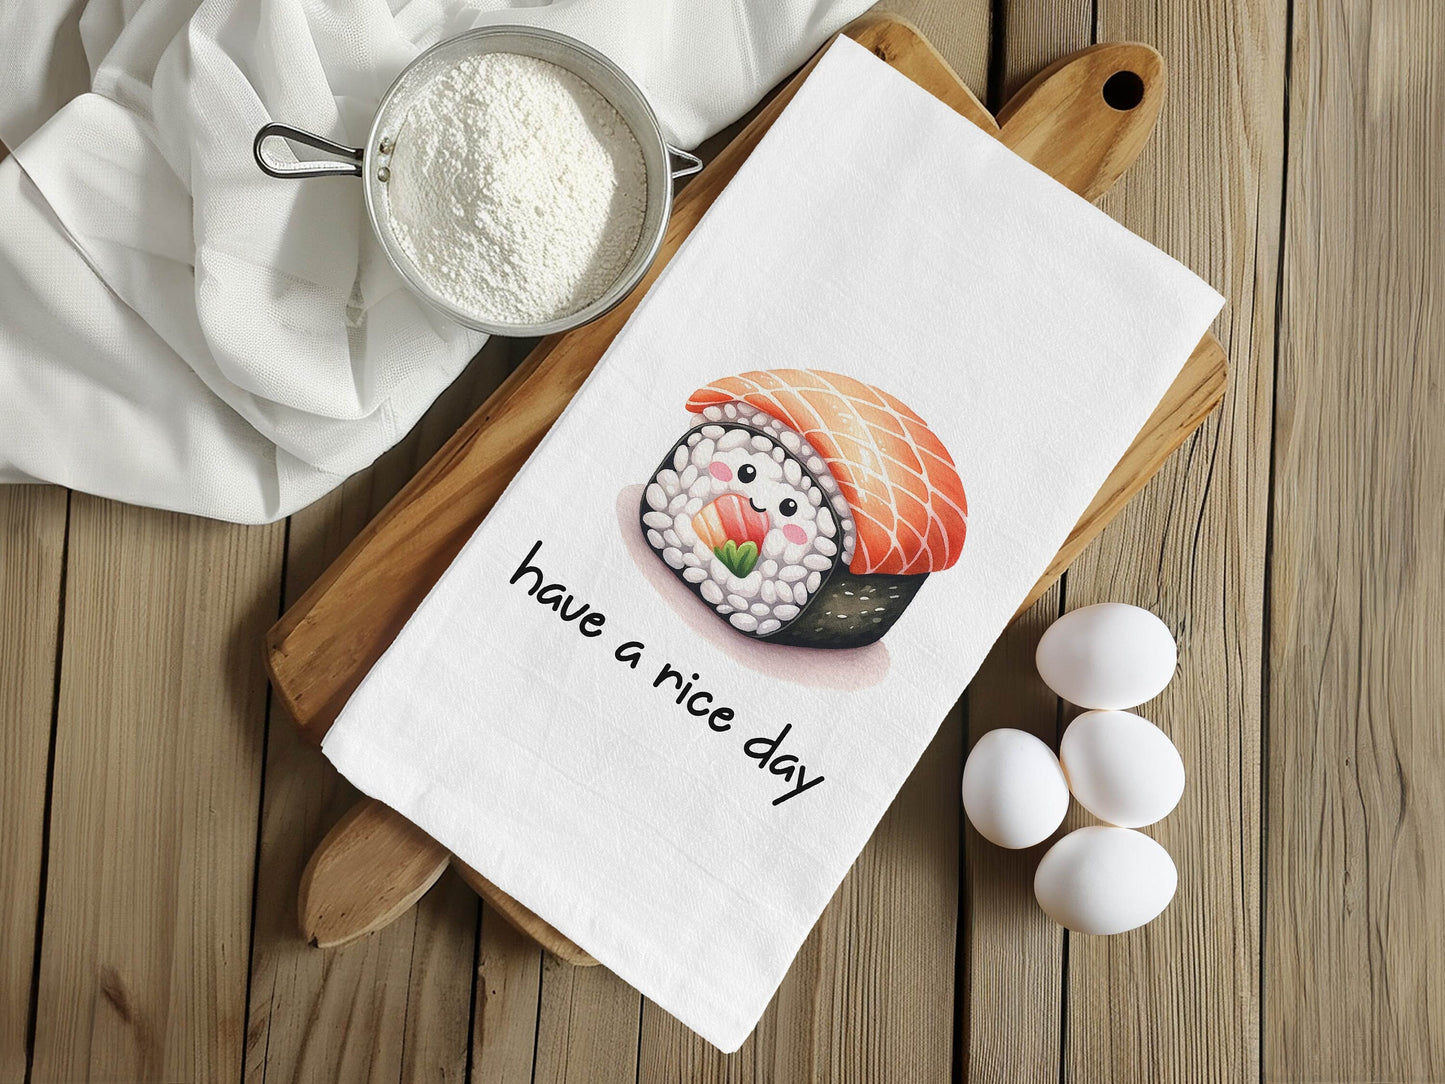 Cute Sushi Roll Towel - Have a Rice Day - Flour Sack Cotton Kitchen Towel